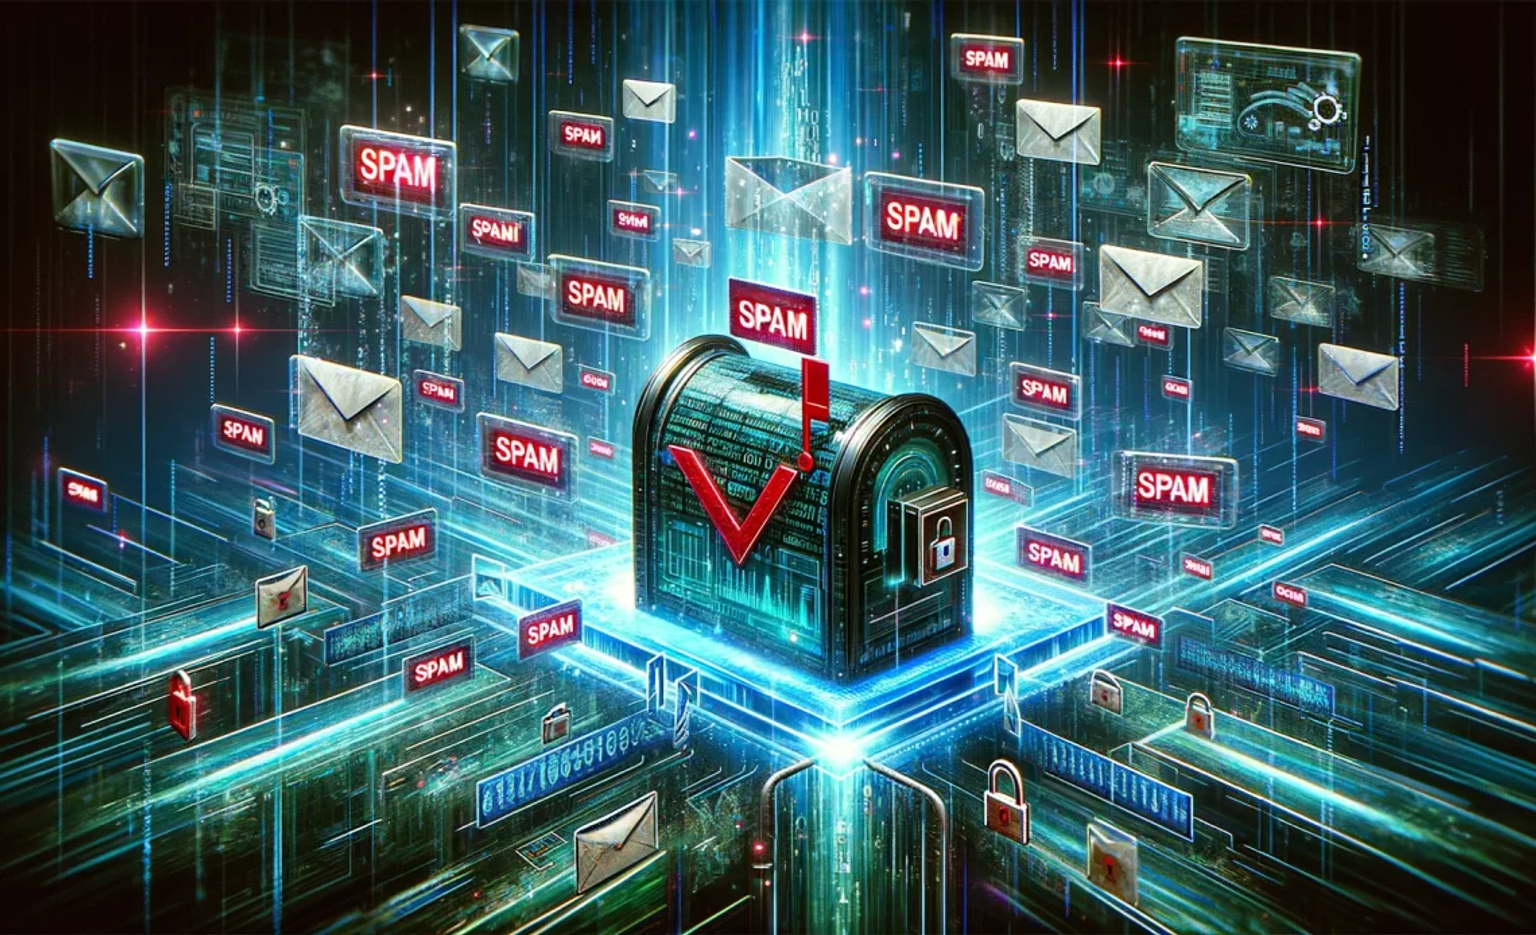 Illustration of a matrix-like environment where emails labelled as spam are approaching an inbox.